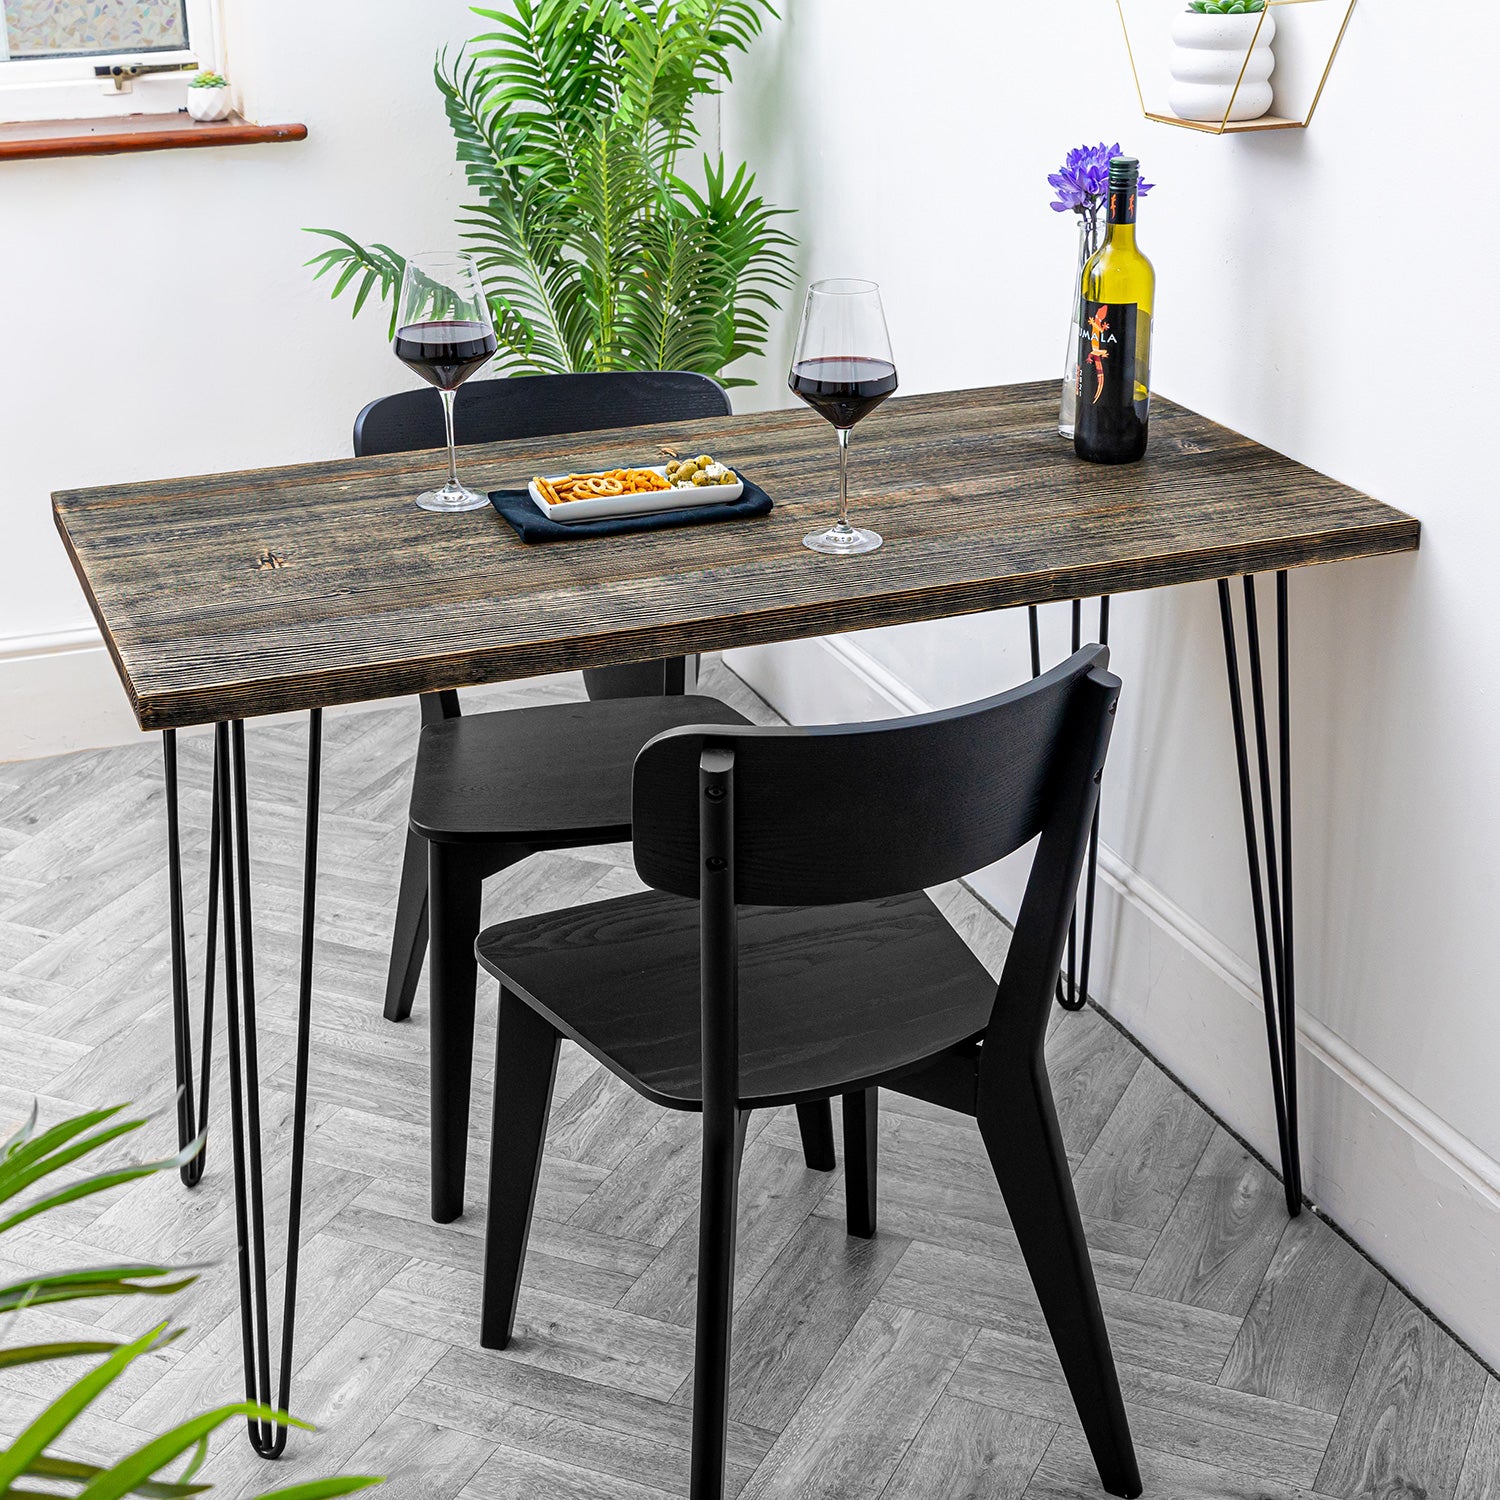 Black Solid Wood Table tops